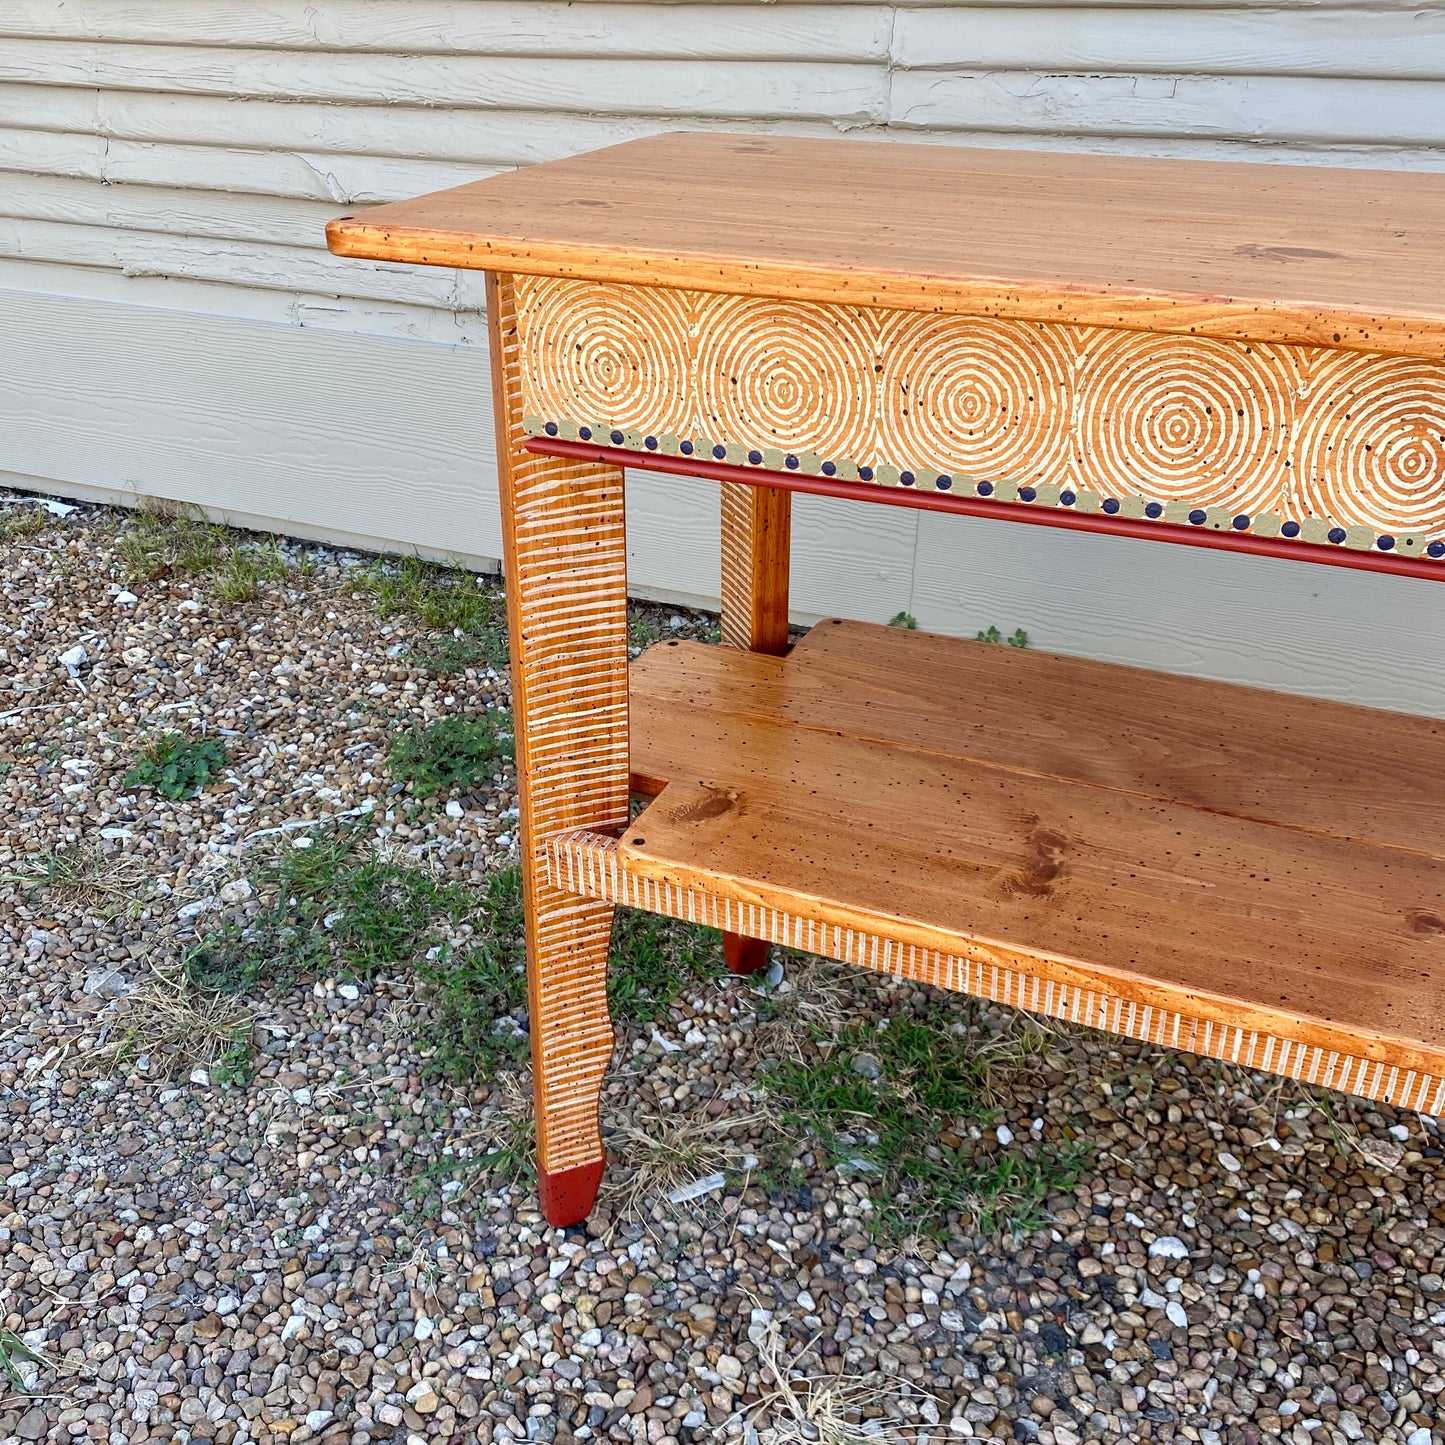 David Marsh 4’ Console with Shelf and Unique Legs